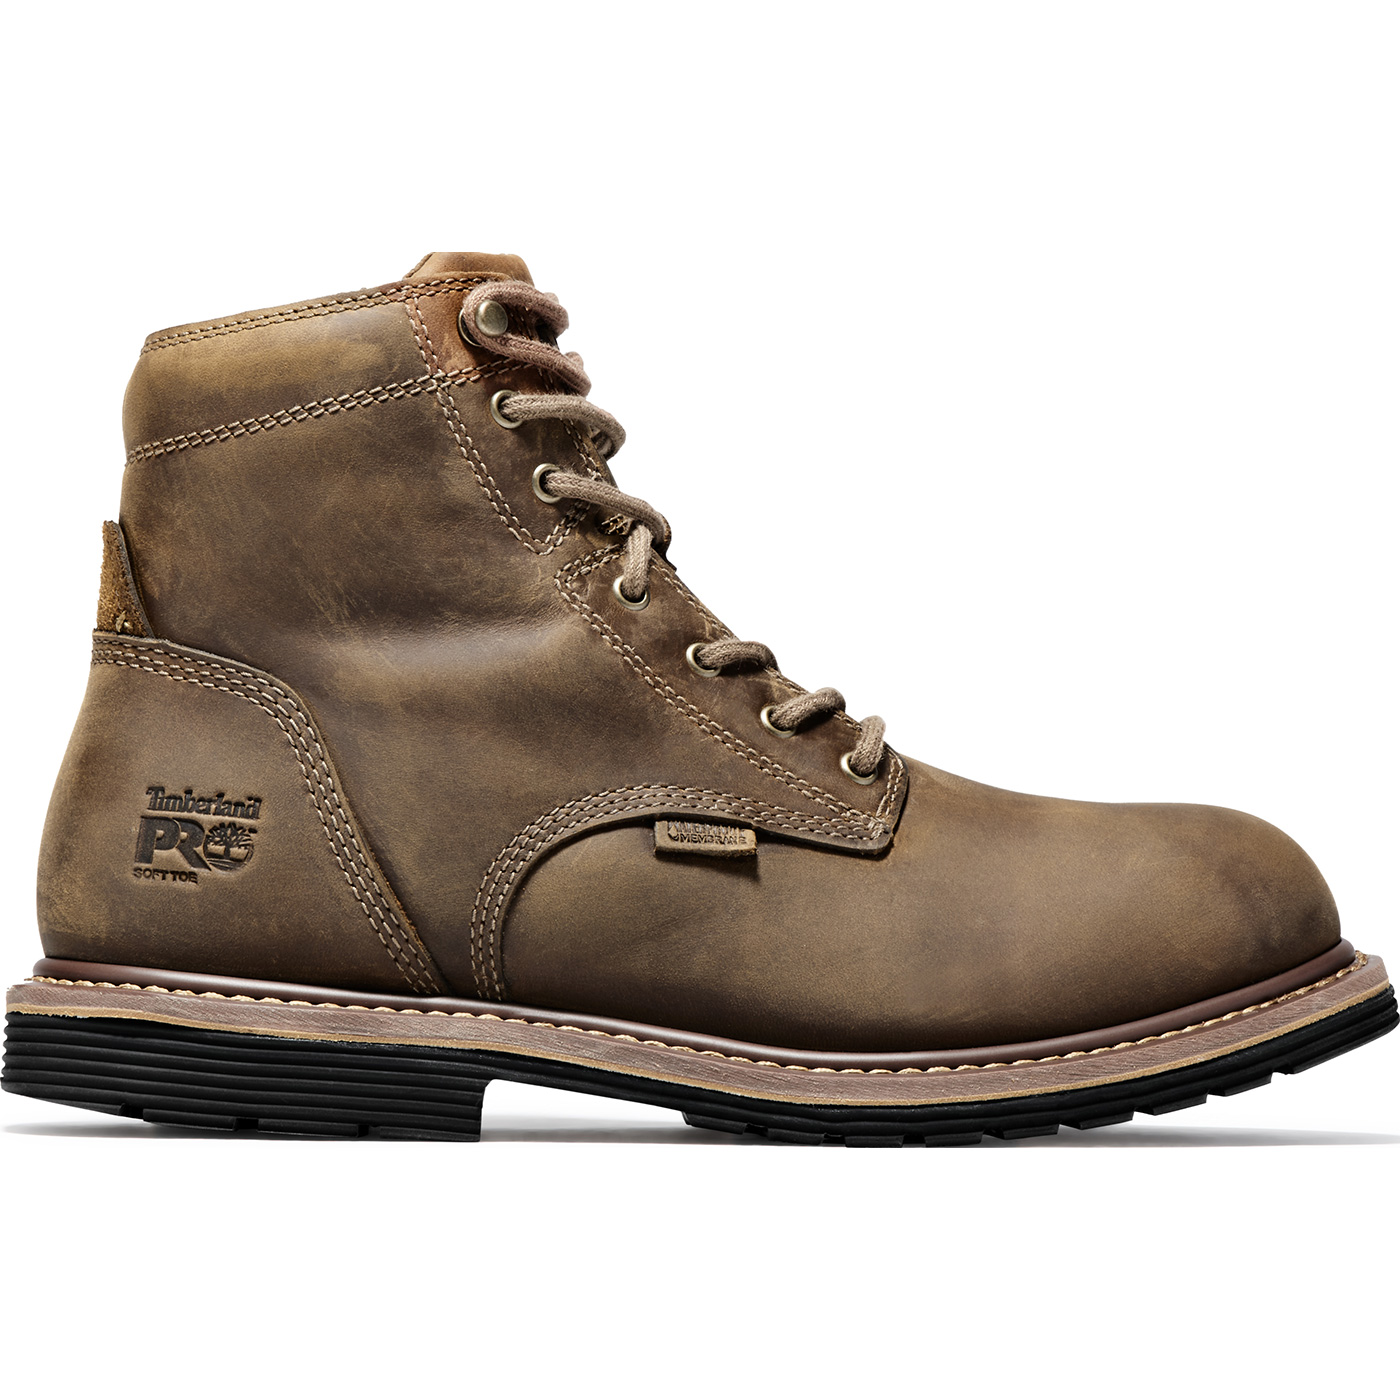 Timberland PRO Millworks Men's 6 Inch Electrical Hazard Waterproof Leather  Work Boot, A1S3Q